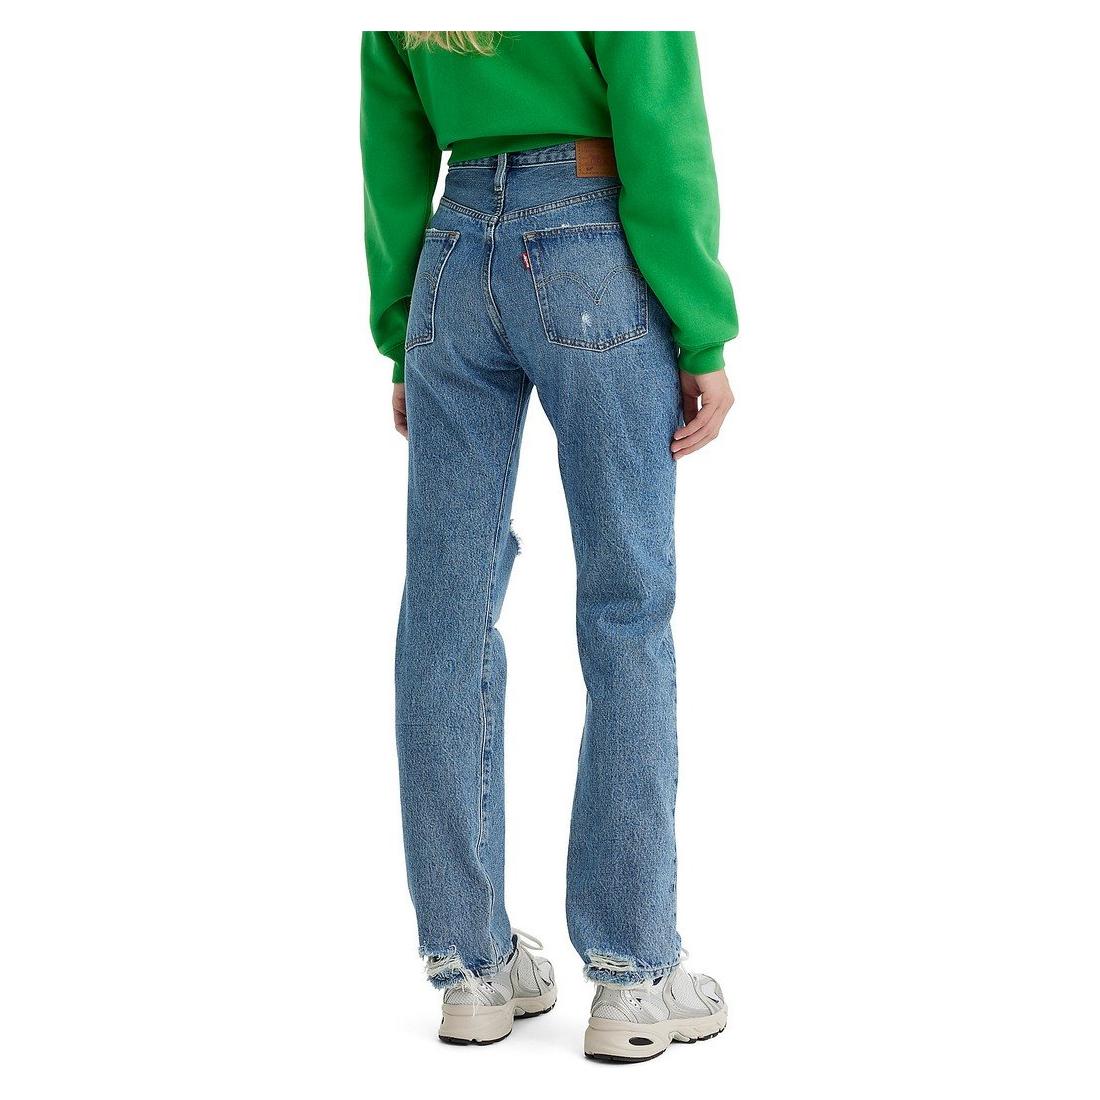 Levi's - 501 in Hits Different-SQ9747957